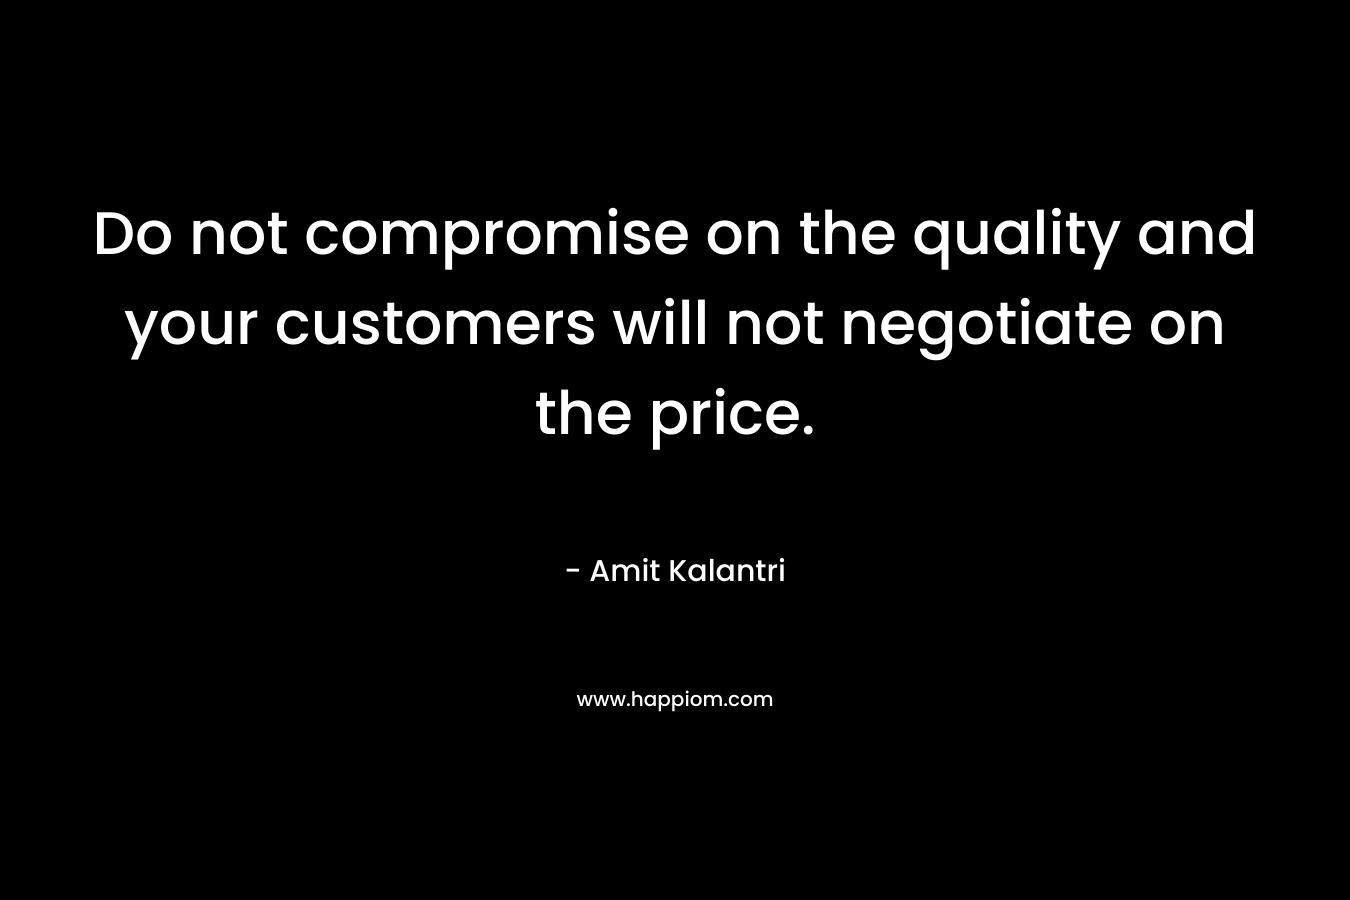 Do not compromise on the quality and your customers will not negotiate on the price. – Amit Kalantri